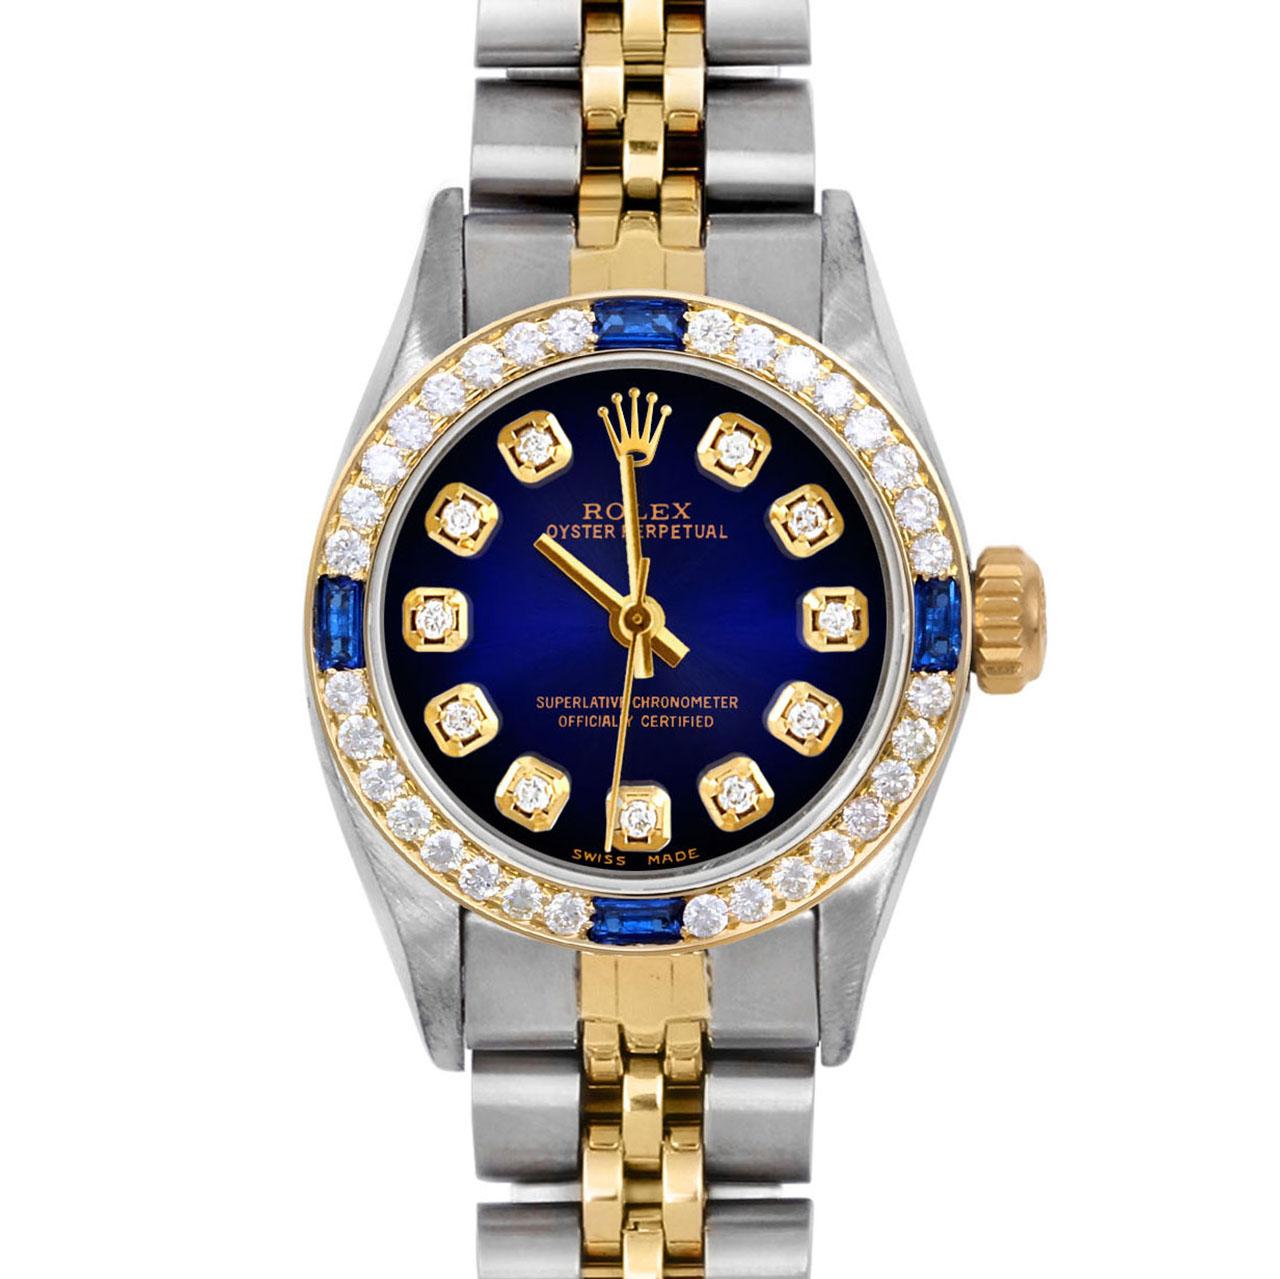 Brand : Rolex
Model : Oyster Perpetual 
Gender : Ladies
Metals : 14K Yellow Gold / Stainless Steel
Case Size : 24 mm
Dial : Custom Blue Vignette Diamond Dial (This dial is not original Rolex And has been added aftermarket yet is a beautiful Custom